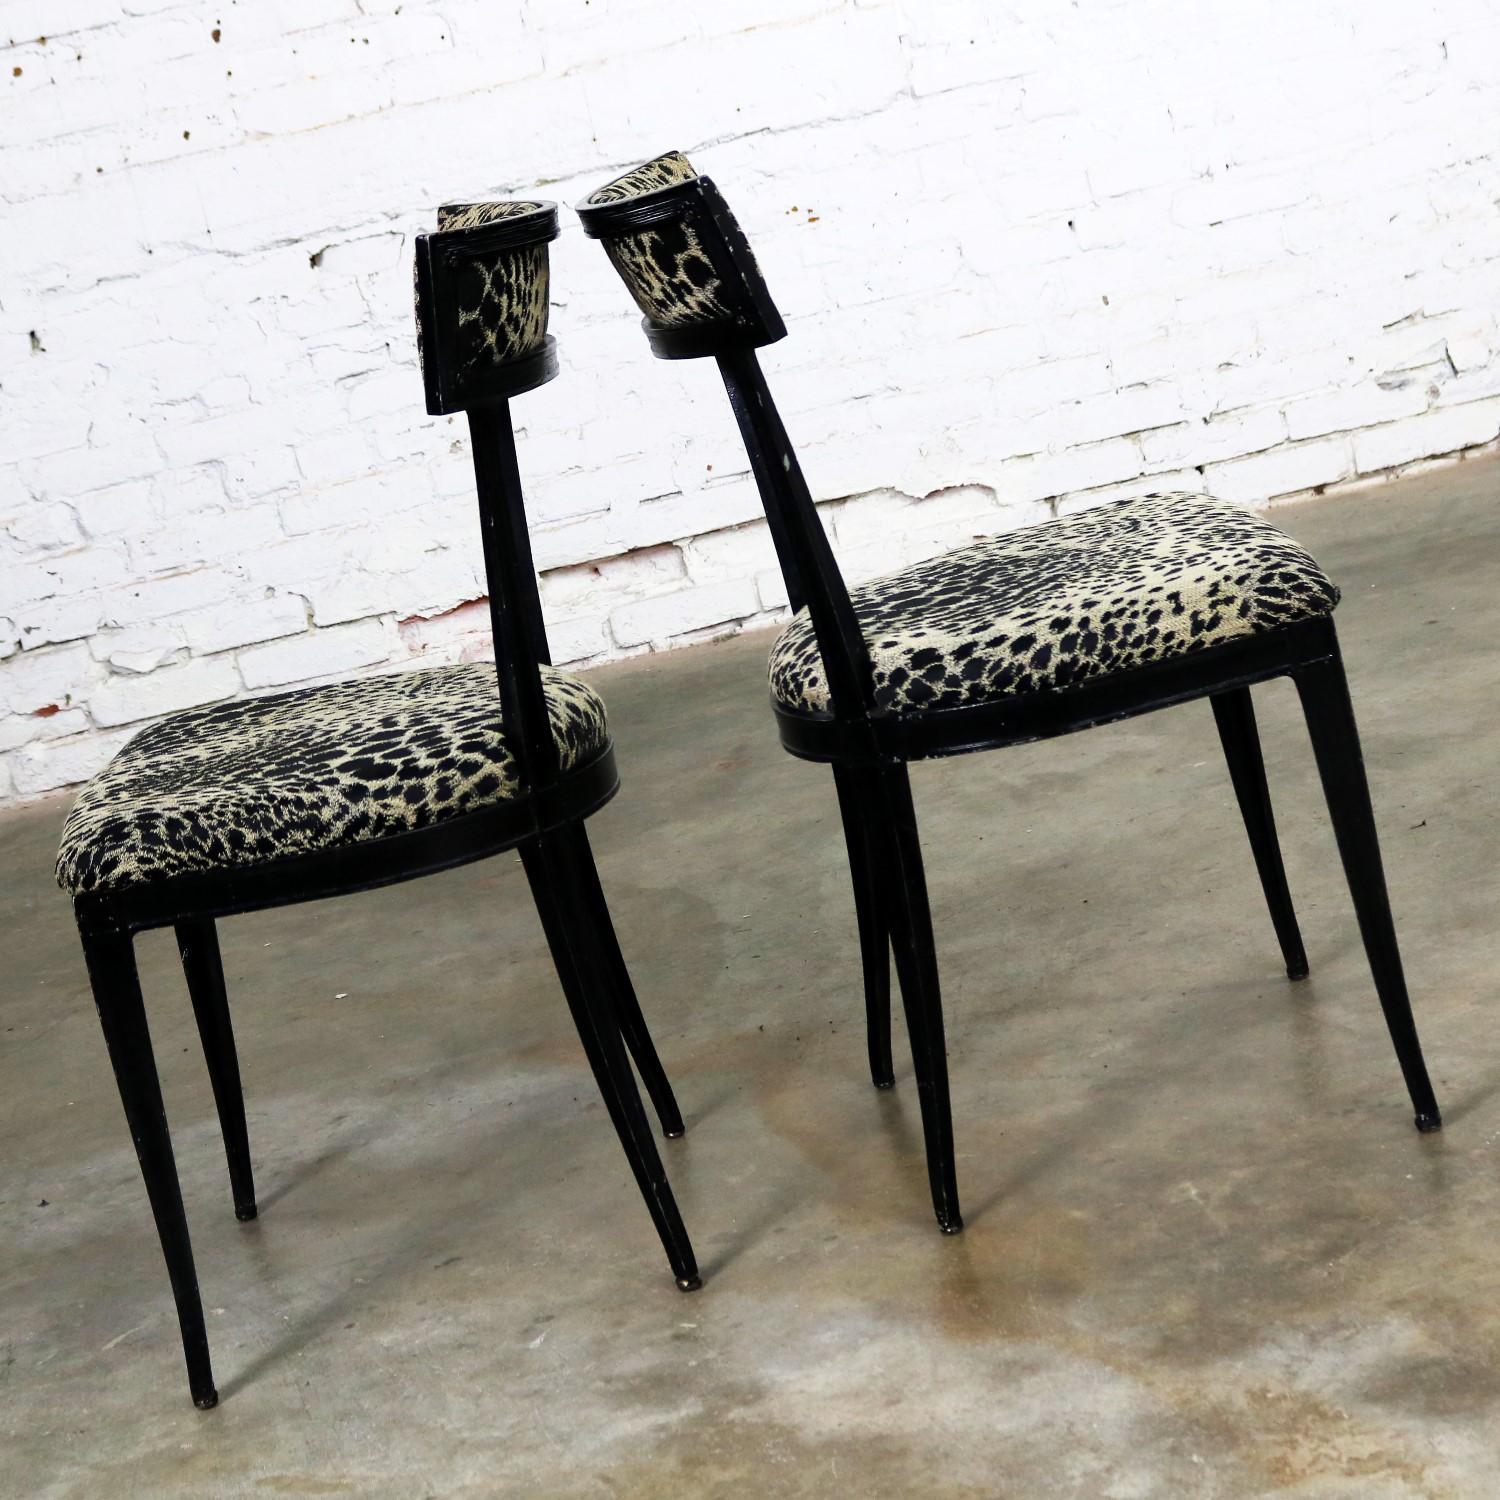 Awesome pair of Art Deco, maybe Hollywood Regency, side chairs by Crucible Products Corp. and attributed to David Weinstock. Black paint over cast aluminium and newly upholstered in a handsome black and beige animal print fabric. They are in